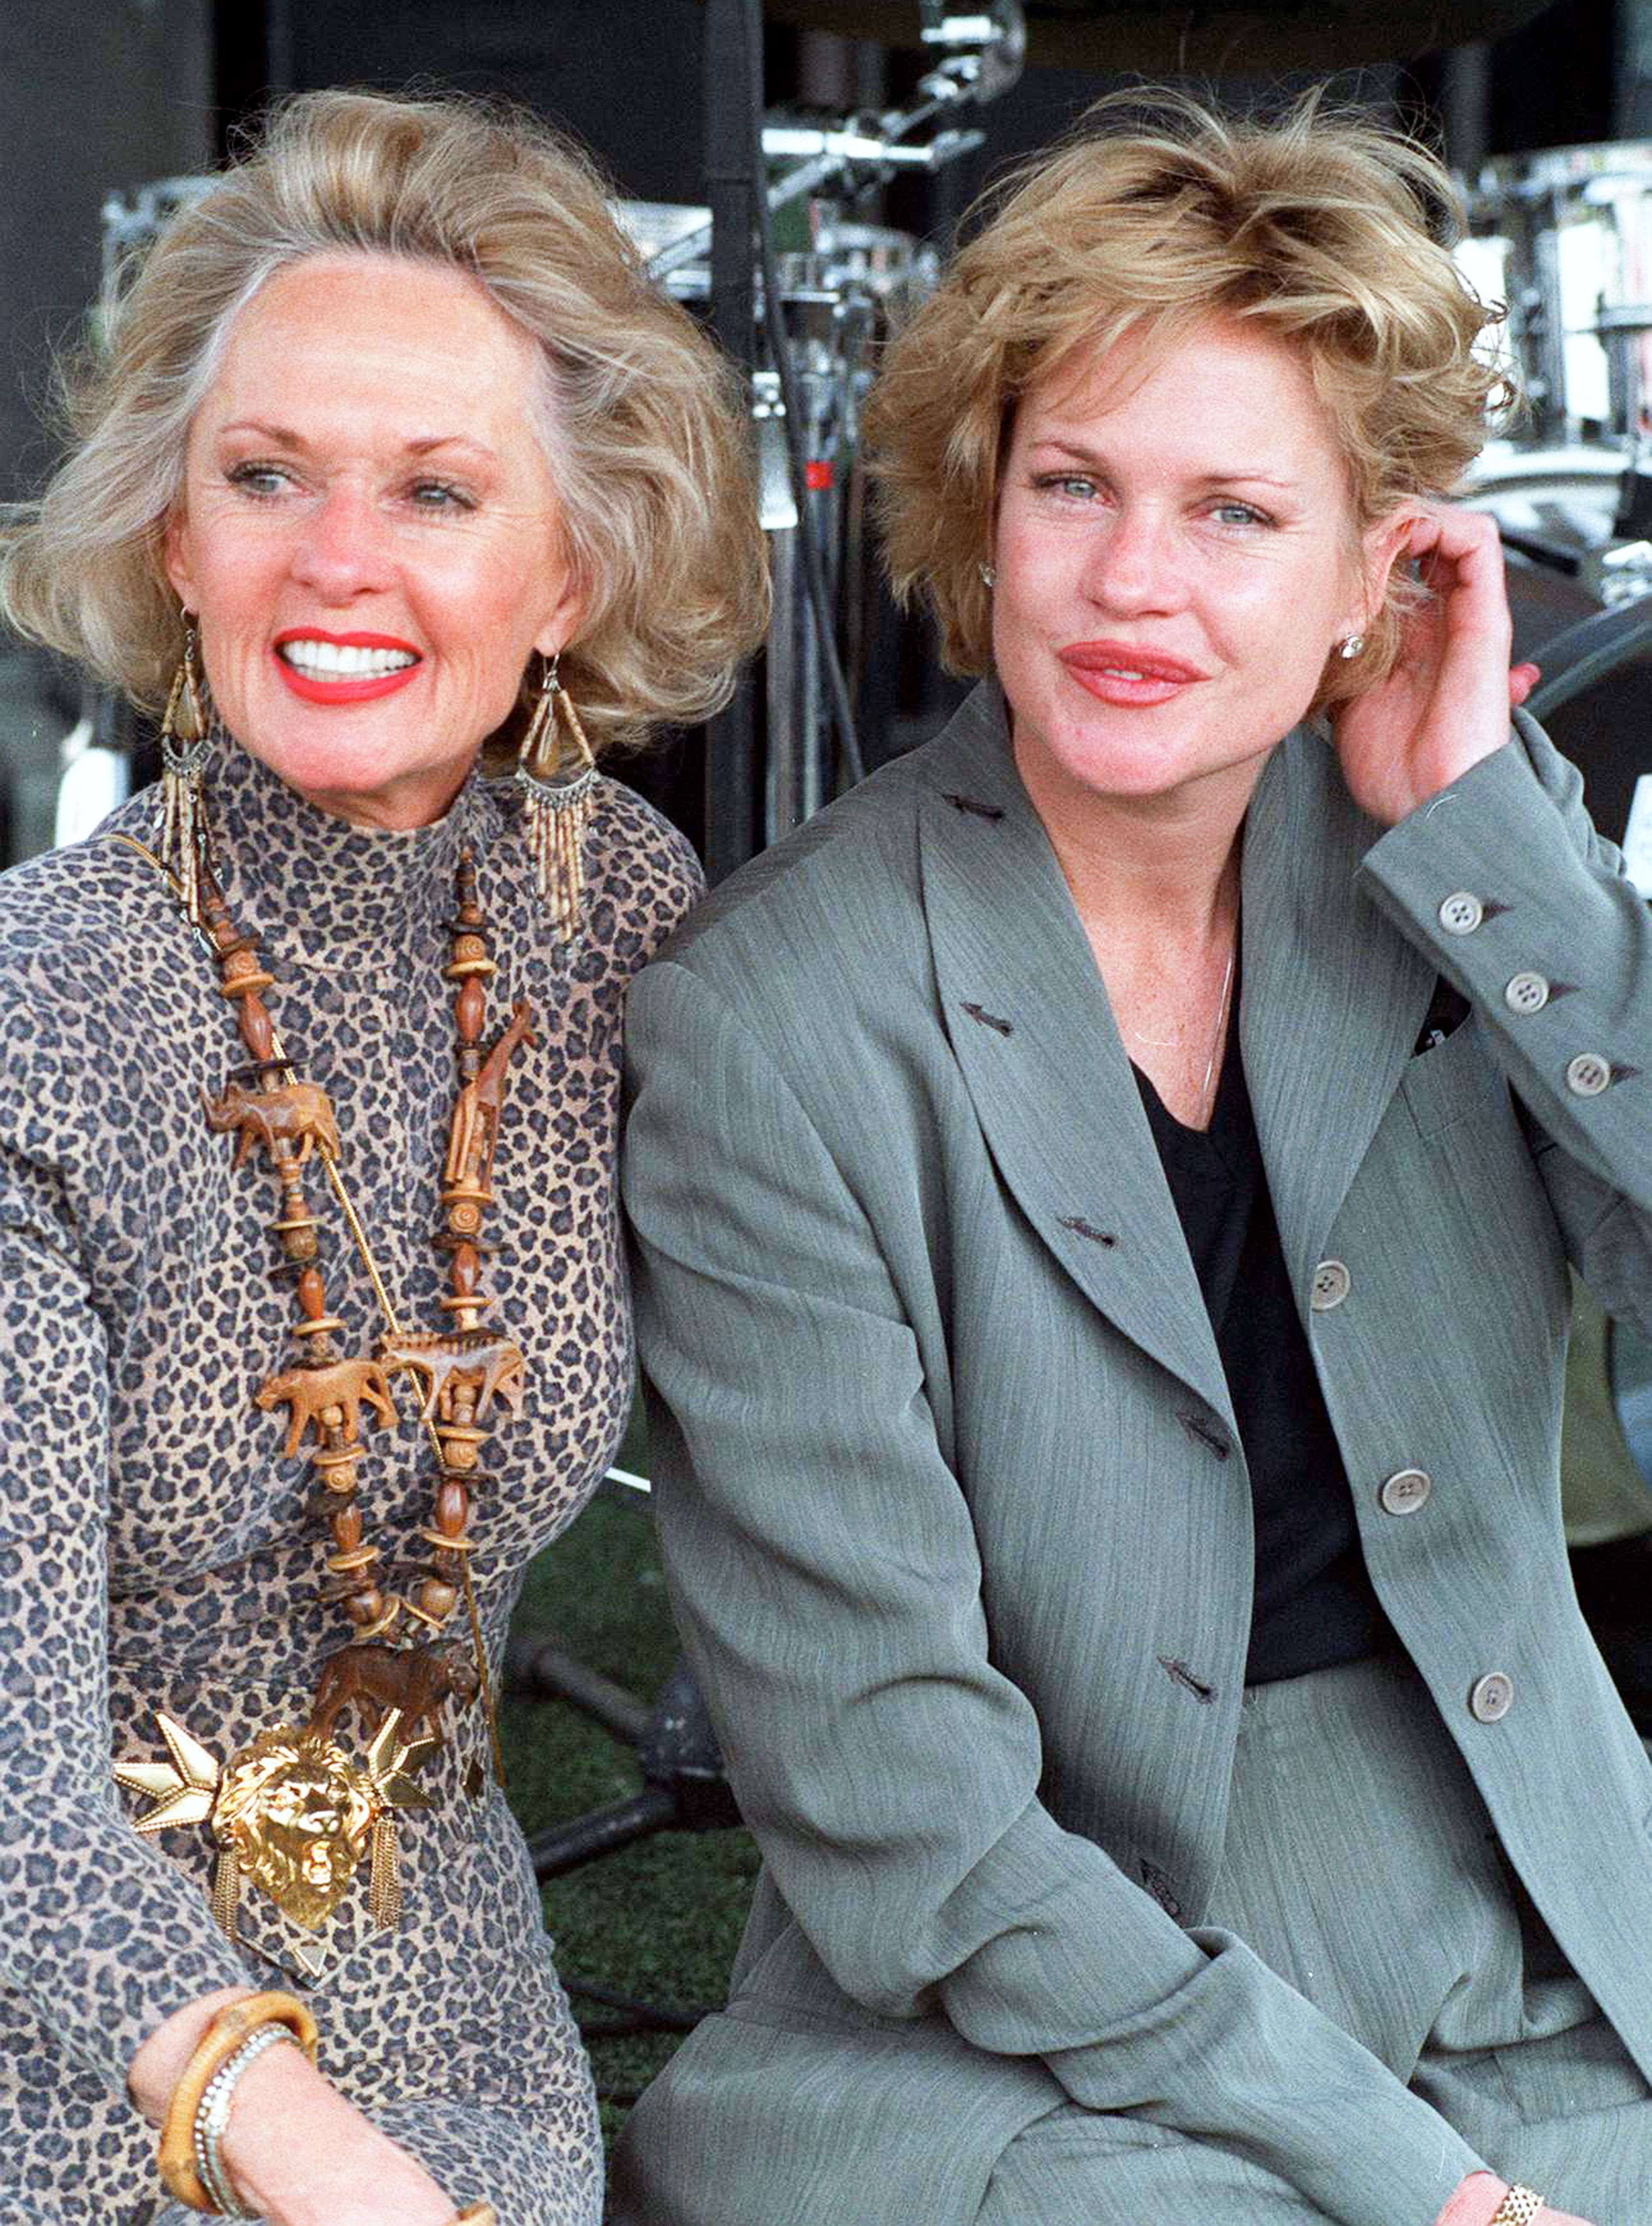 Melanie Griffith and Tippi Hedren, during 'Artists for Shambala' Animal Preservation Benefit - October 30, 1994 in Acton, California, United States. | Photo: Getty Images